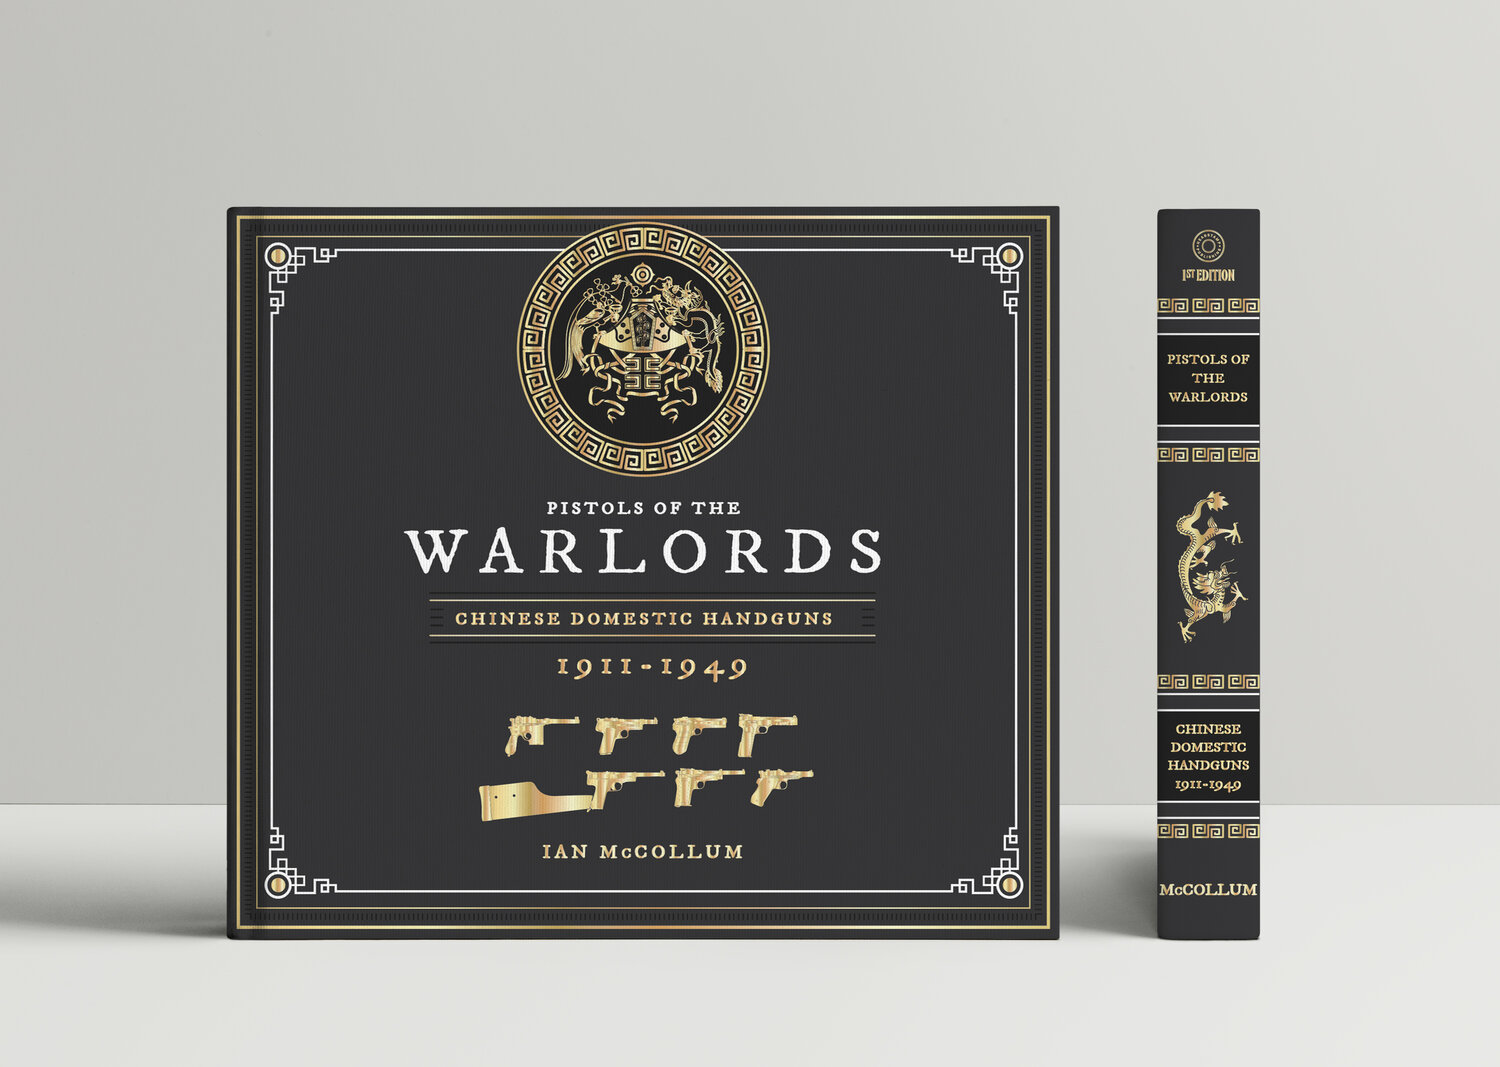 Pistols of the Warlords (Signature Edition)